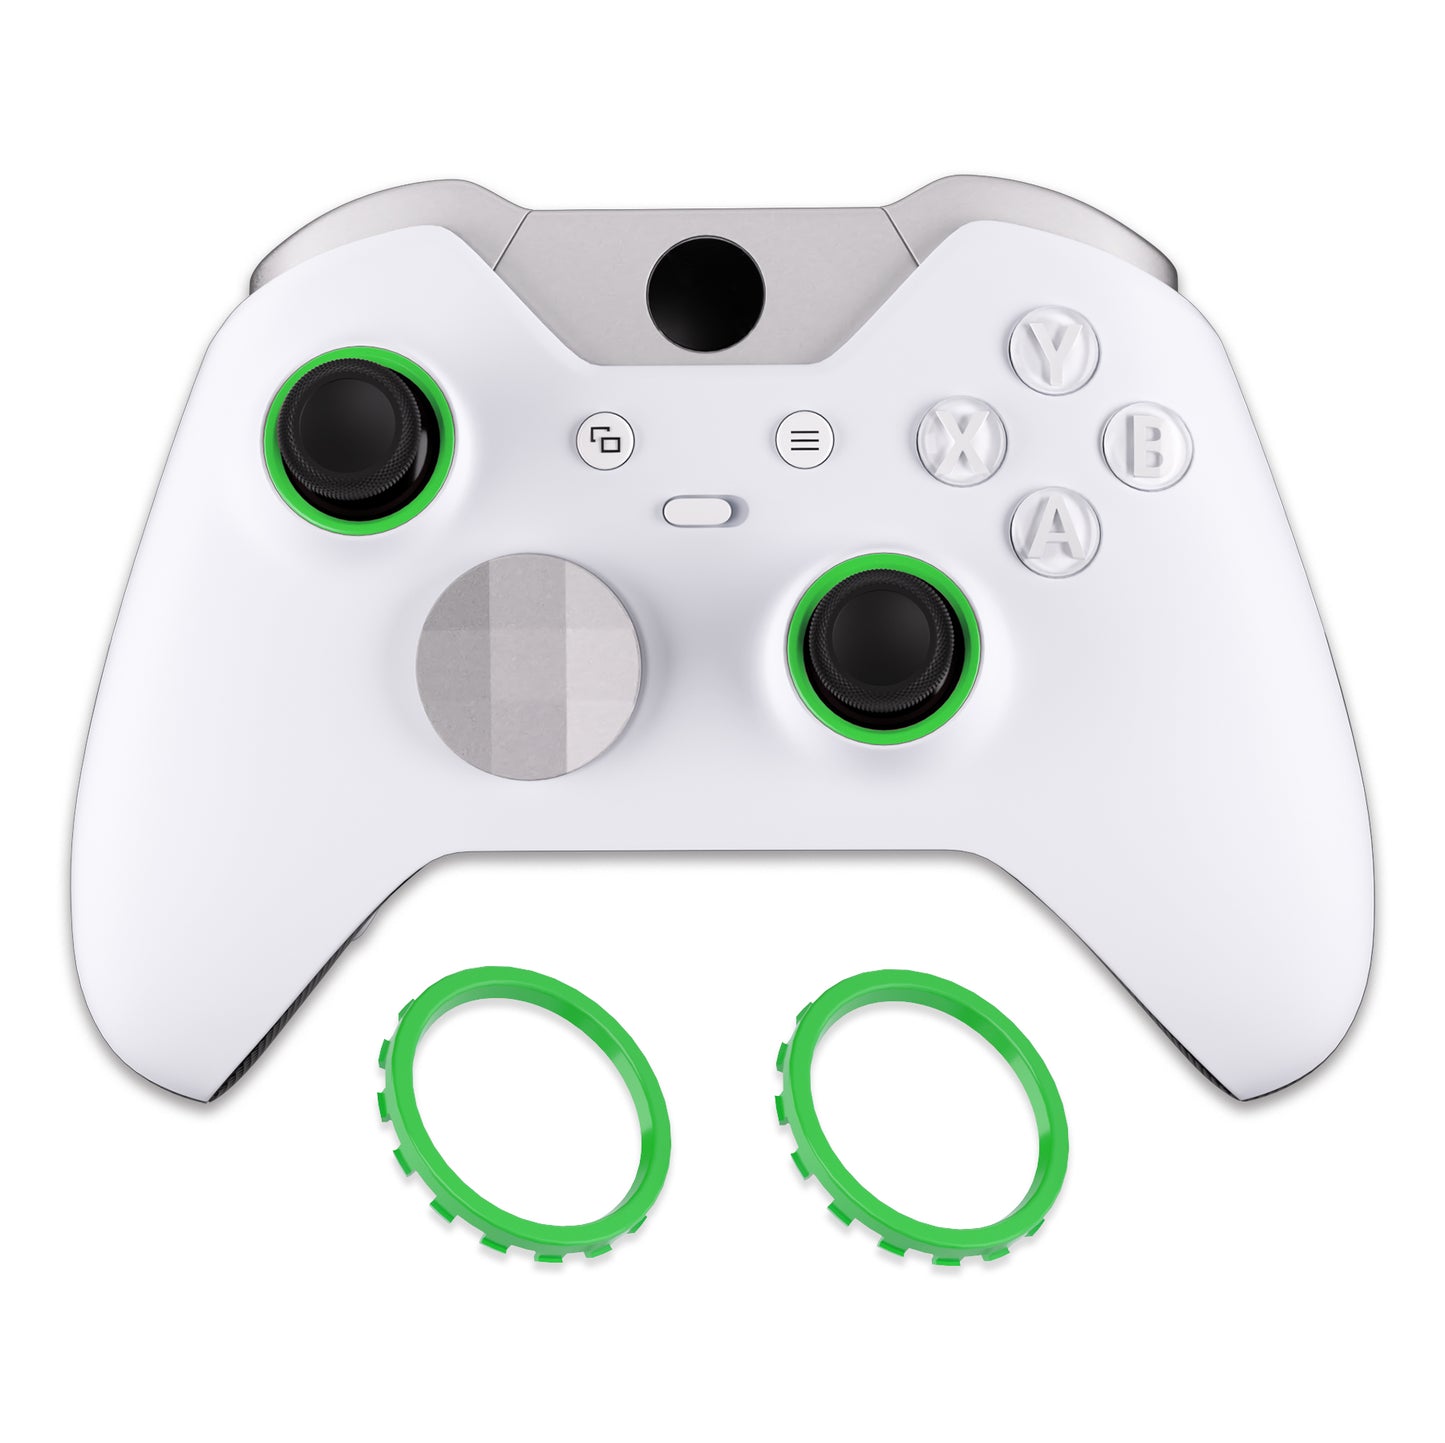 eXtremeRate Custom Accent Rings for eXtremeRate ASR Version Shell, Compatible with Xbox Series X/S Controller & Xbox One Elite (Model 1698) & Elite Series 2 (Model 1797 and Core Model 1797) Controller - Green eXtremeRate